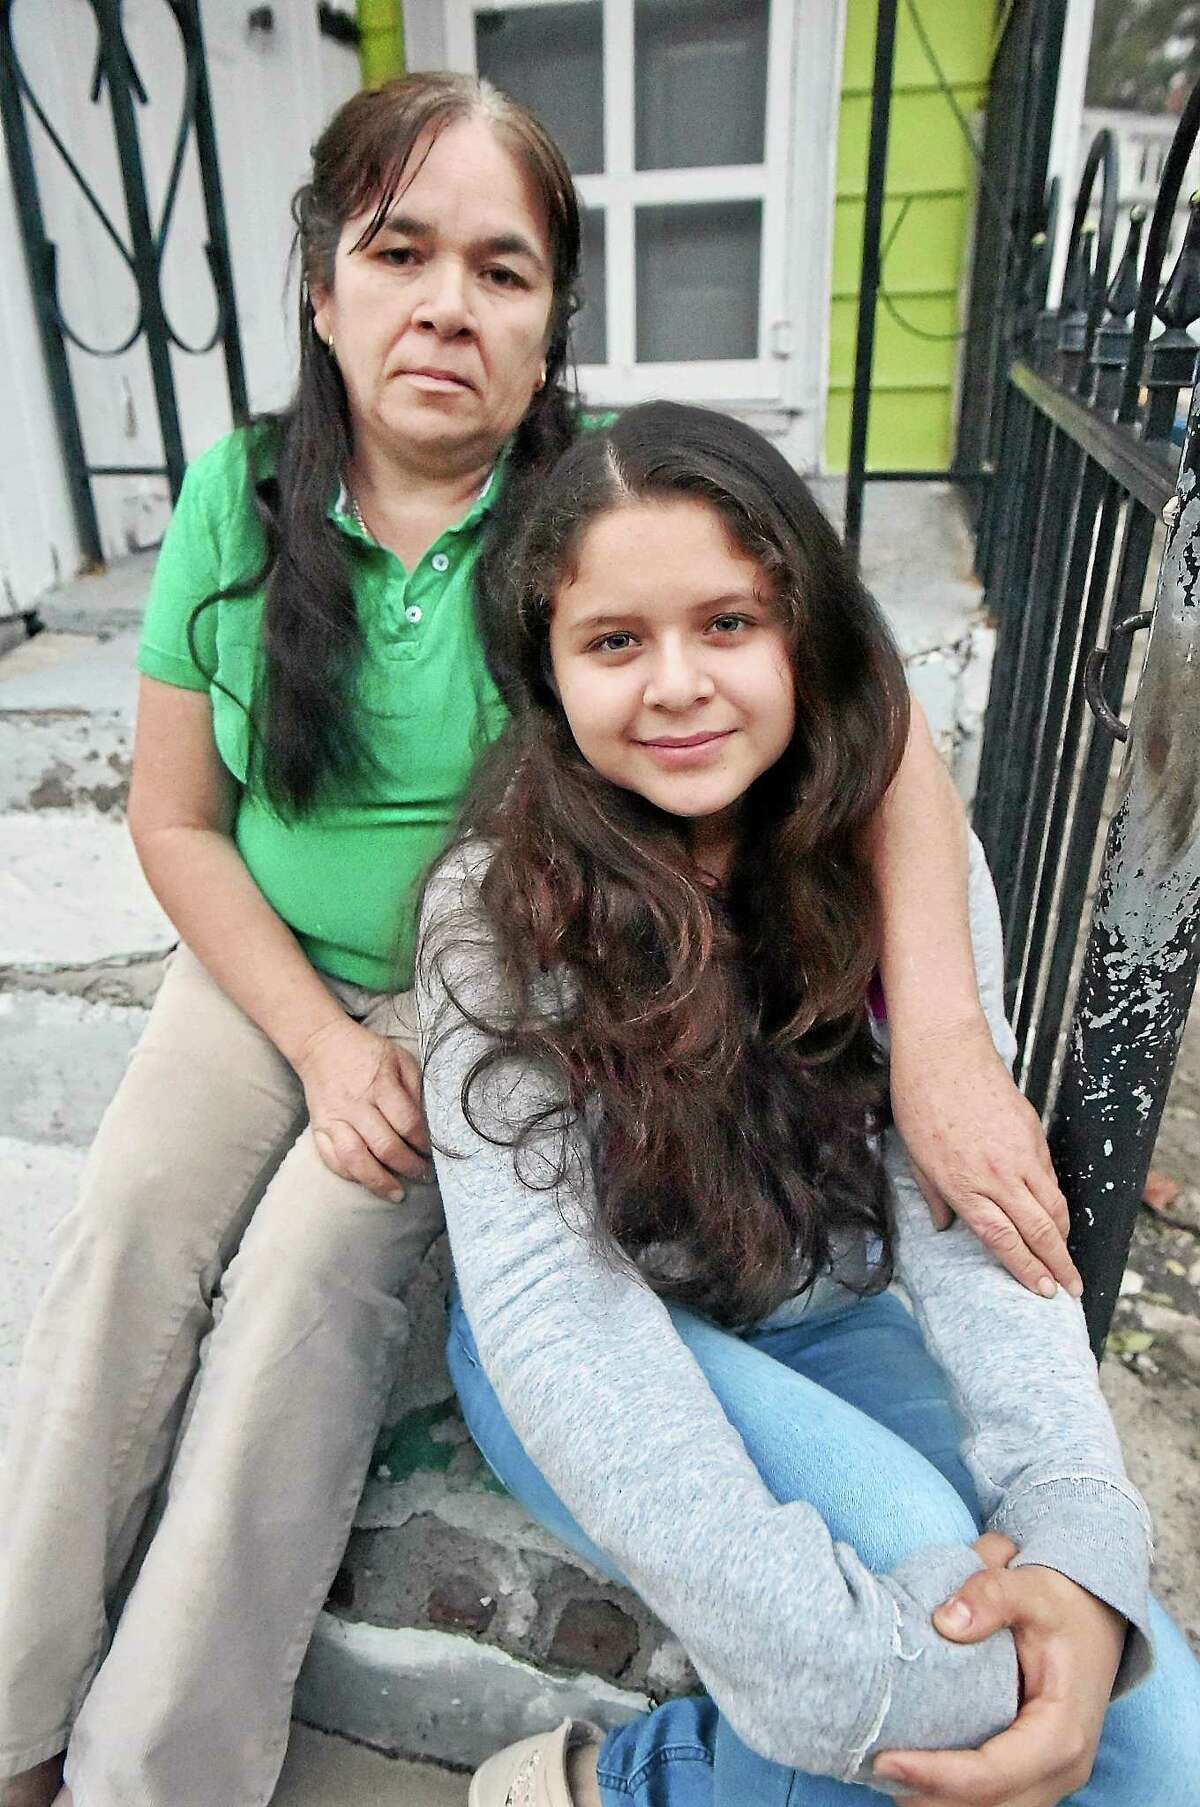 Miriam Mencos of Guatemala and her daughter, Hazel Mencos Jimenez, 13, who arrived in Connecticut in July is preparing to fight to stay in the U.S.